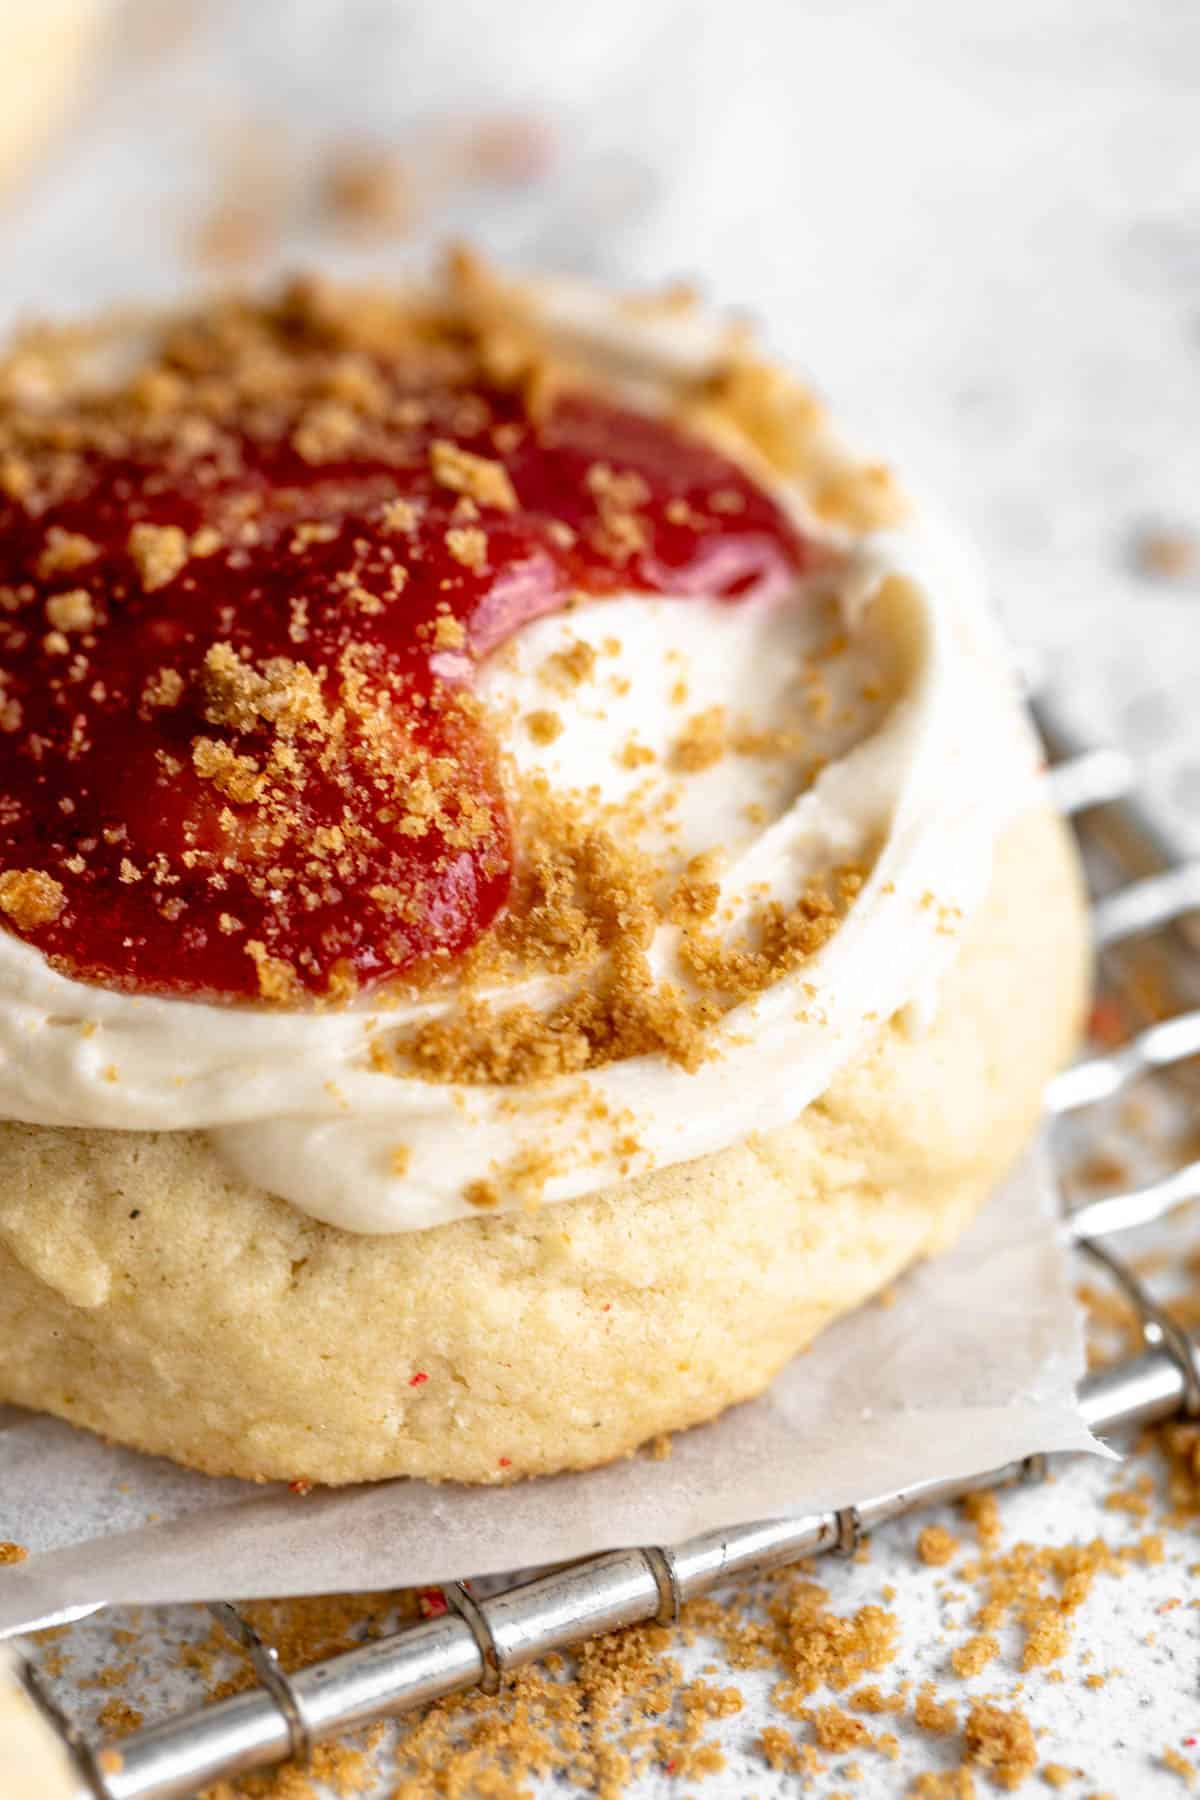 gluten free crumbl cookies with frosting and jam on top